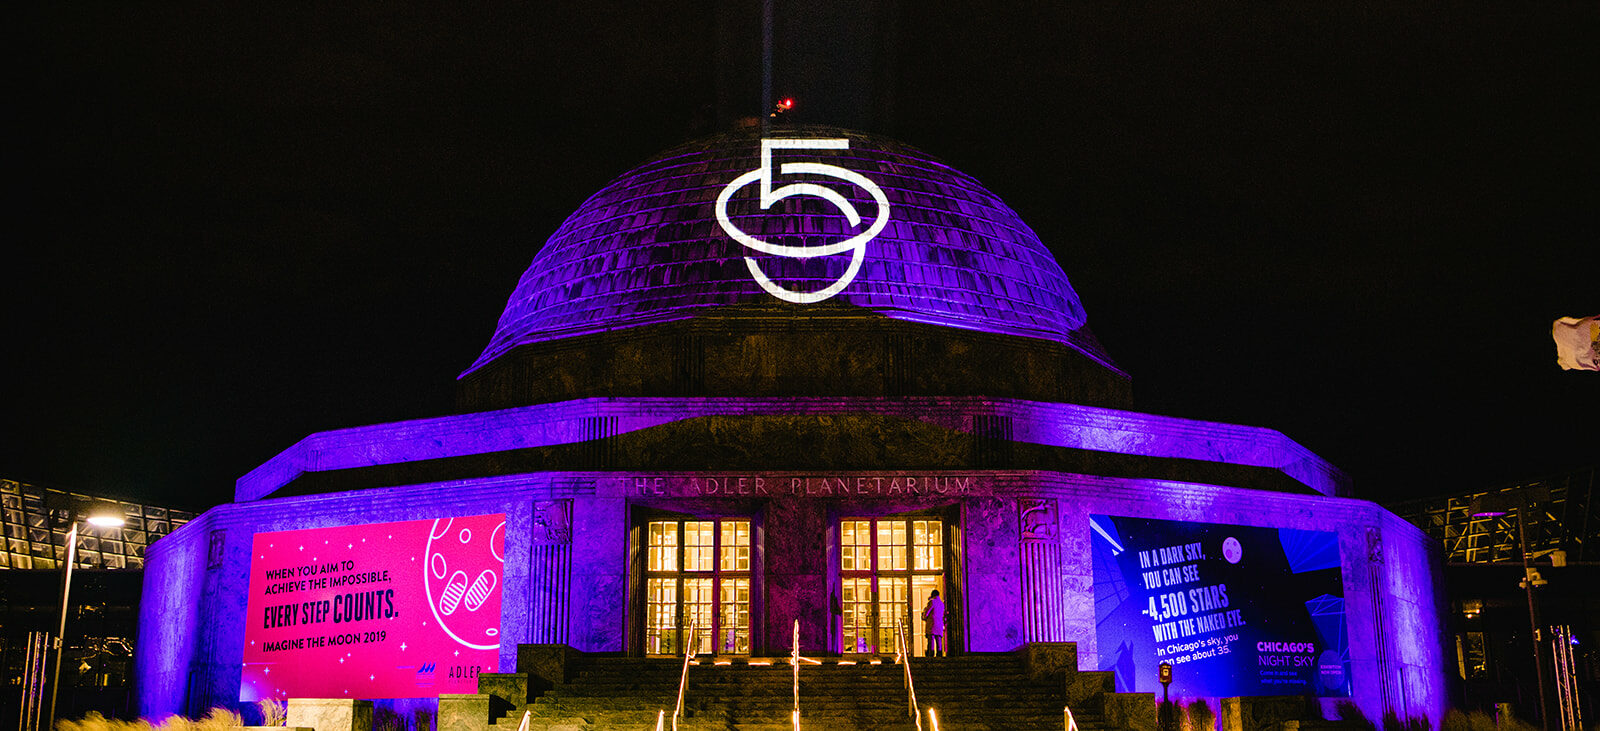 Exterior of the Adler Planetarium at Night featuring a "50" projection on the dome roof for a branded event.